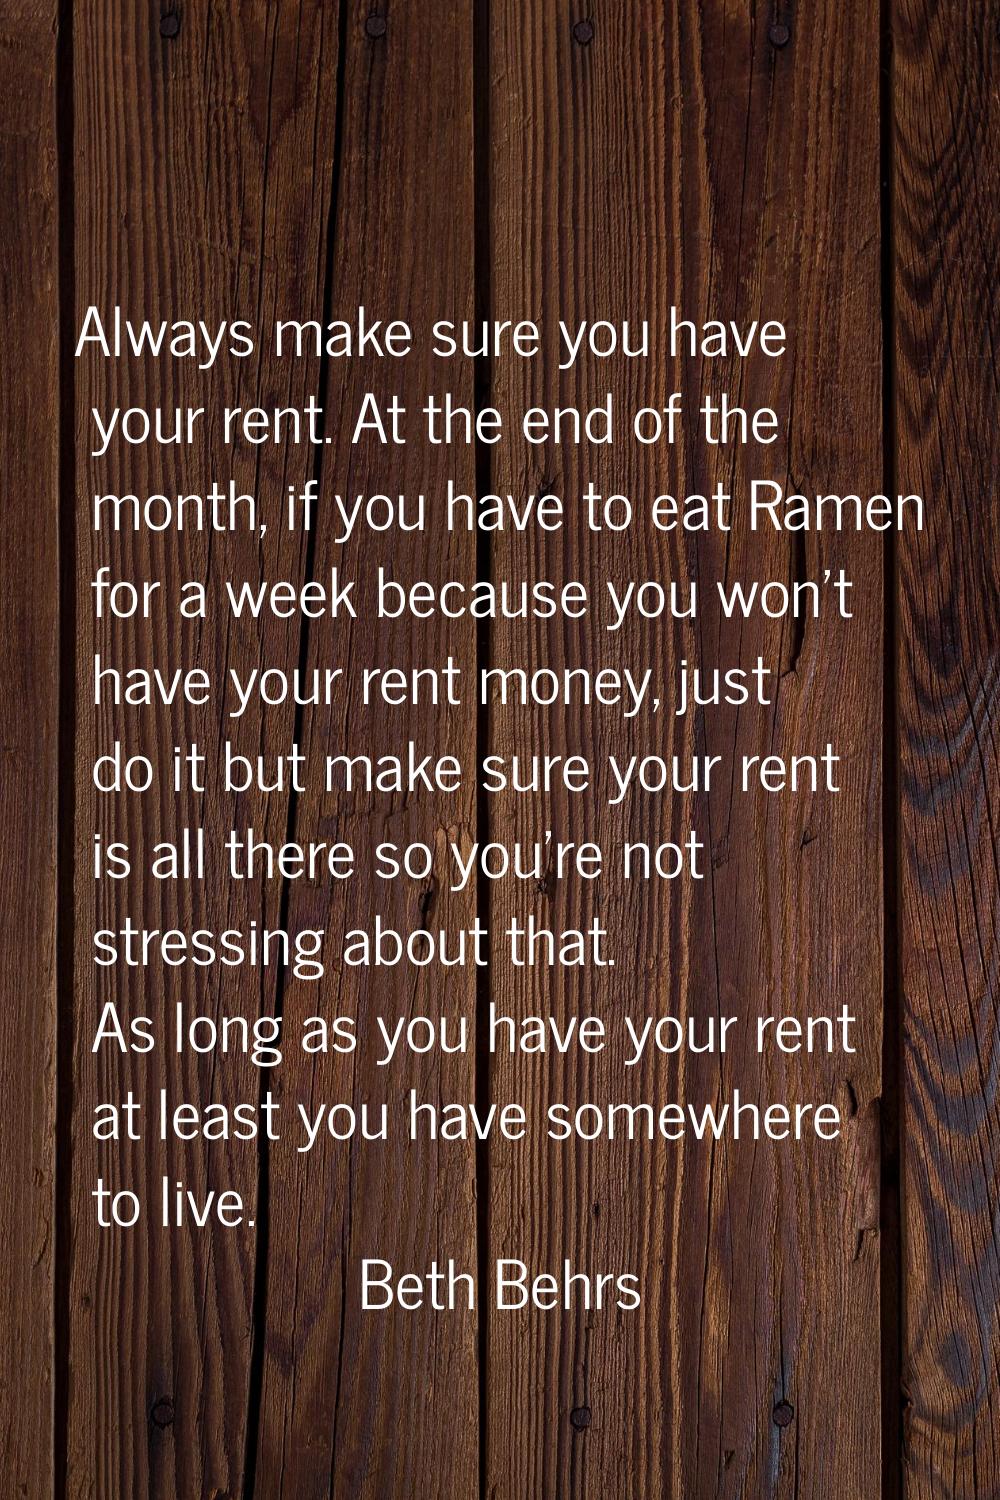 Always make sure you have your rent. At the end of the month, if you have to eat Ramen for a week b